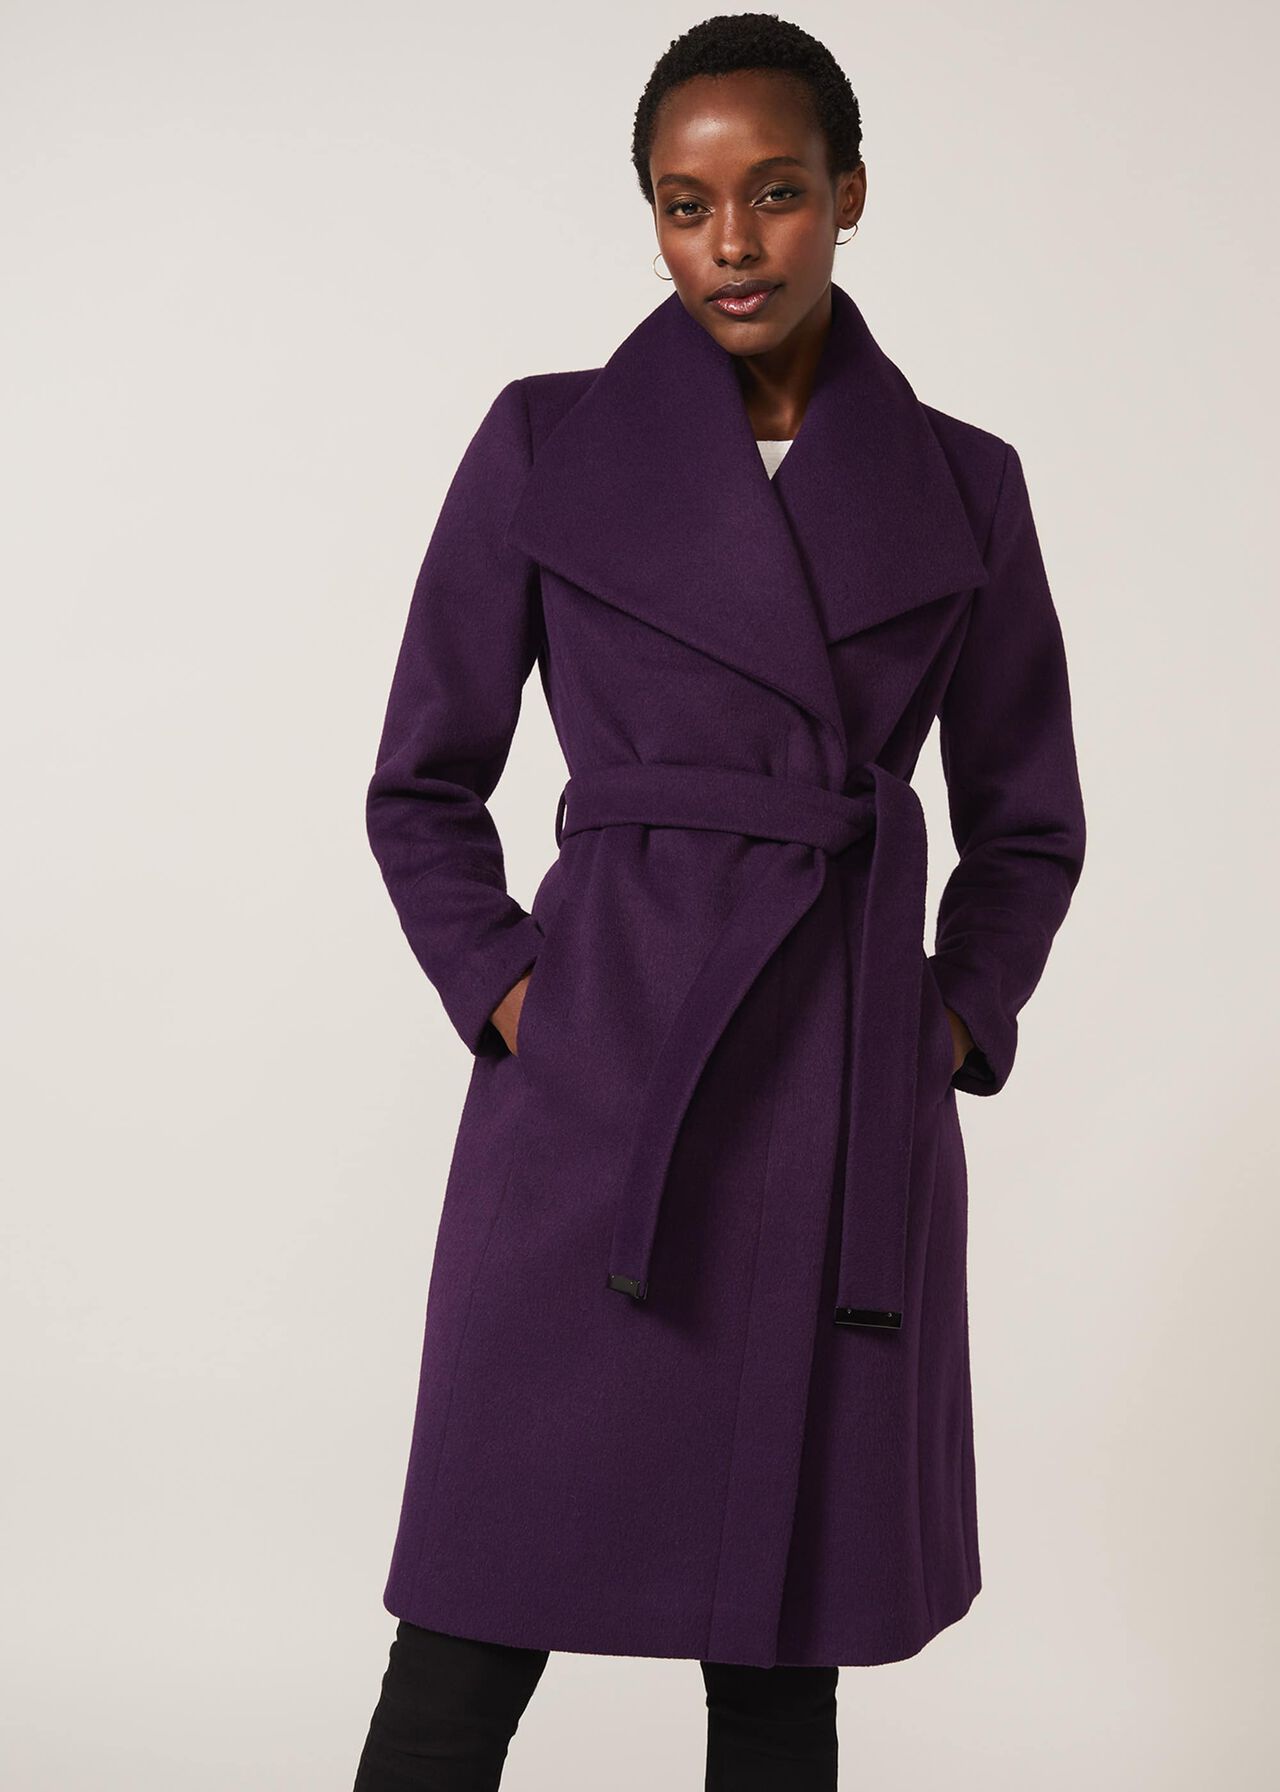 Long Belted Coat Low Prices, Save 70% | jlcatj.gob.mx